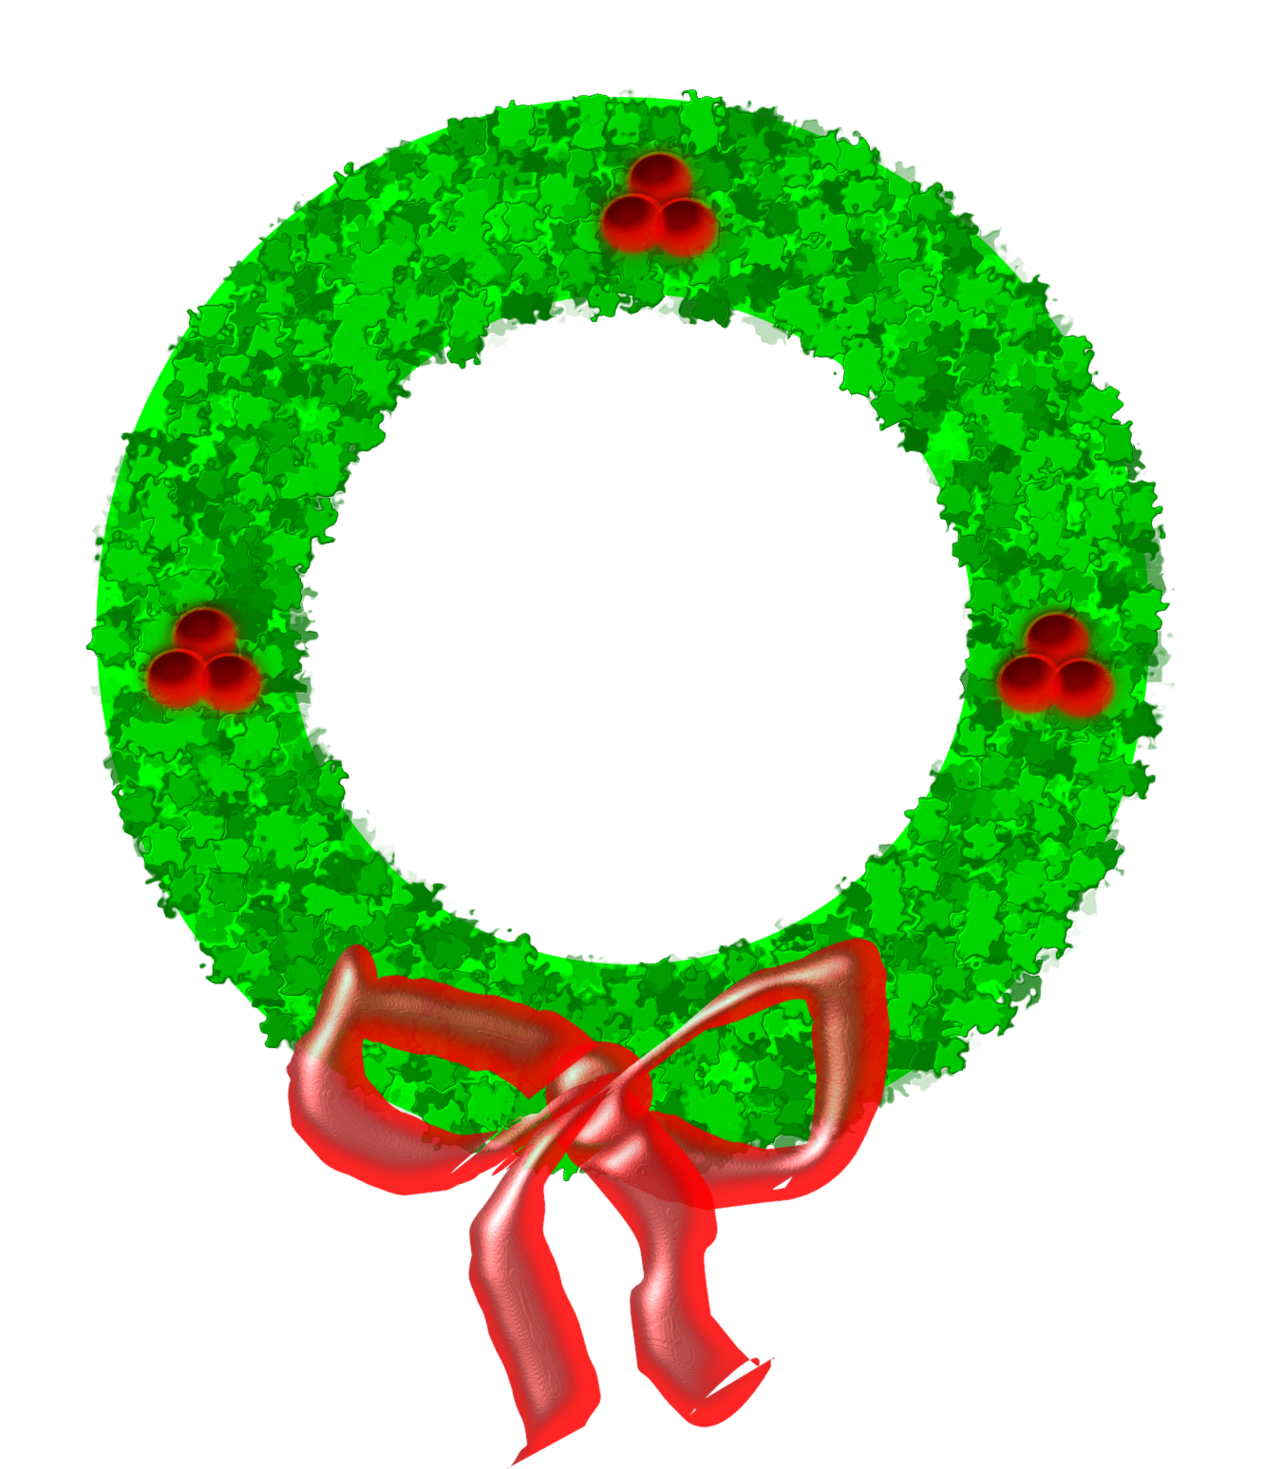 Christmas wreath clipart free graphic download - Clipartix